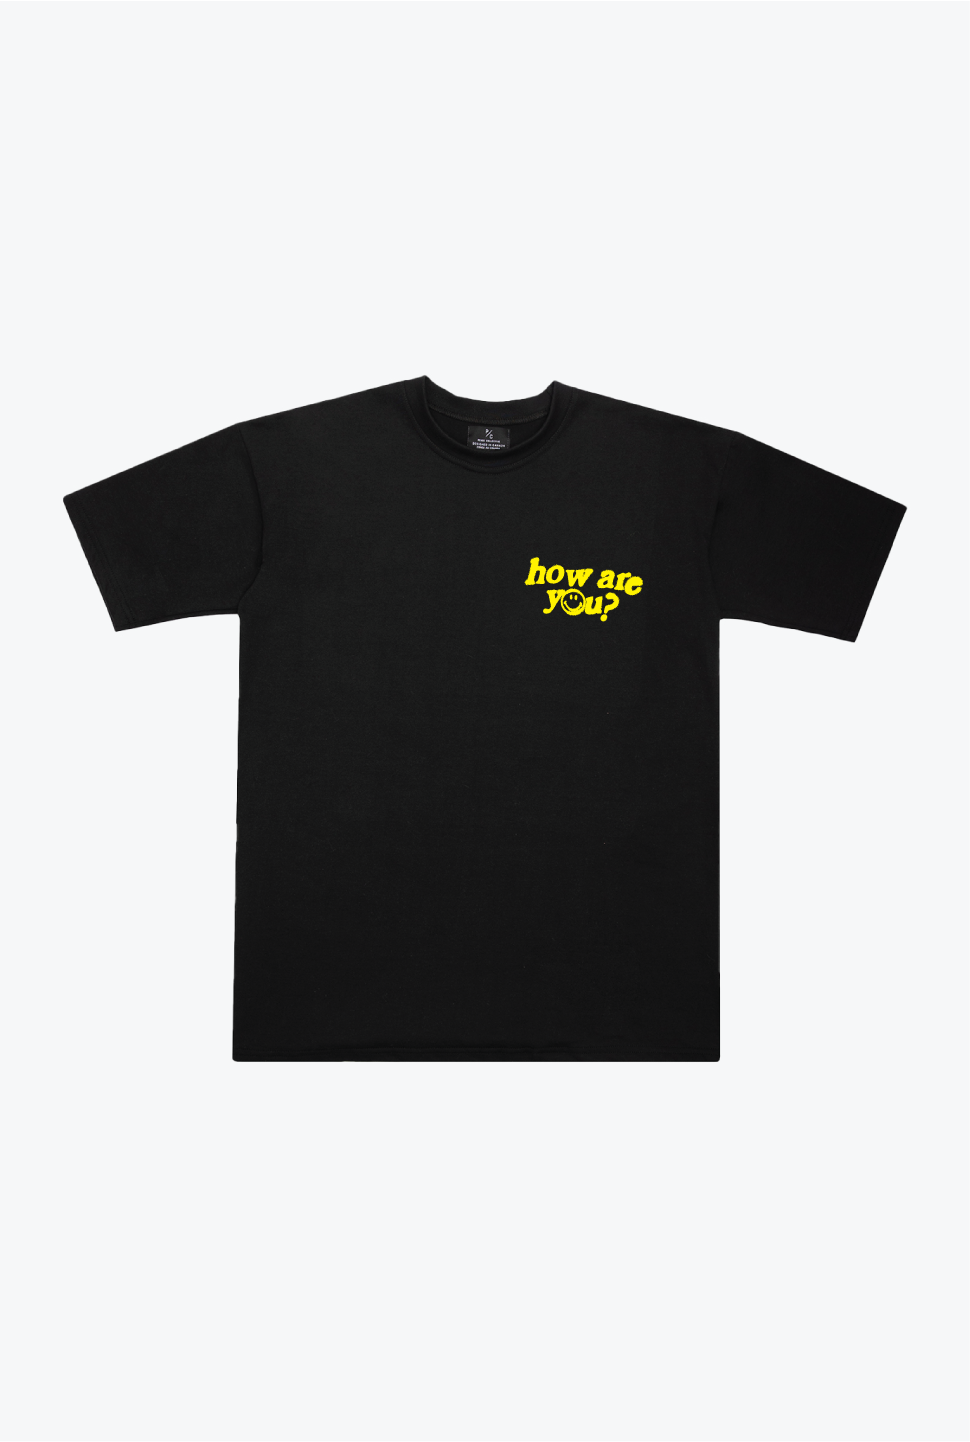 P/C x Smiley How Are You Really Heavyweight T-Shirt - Black